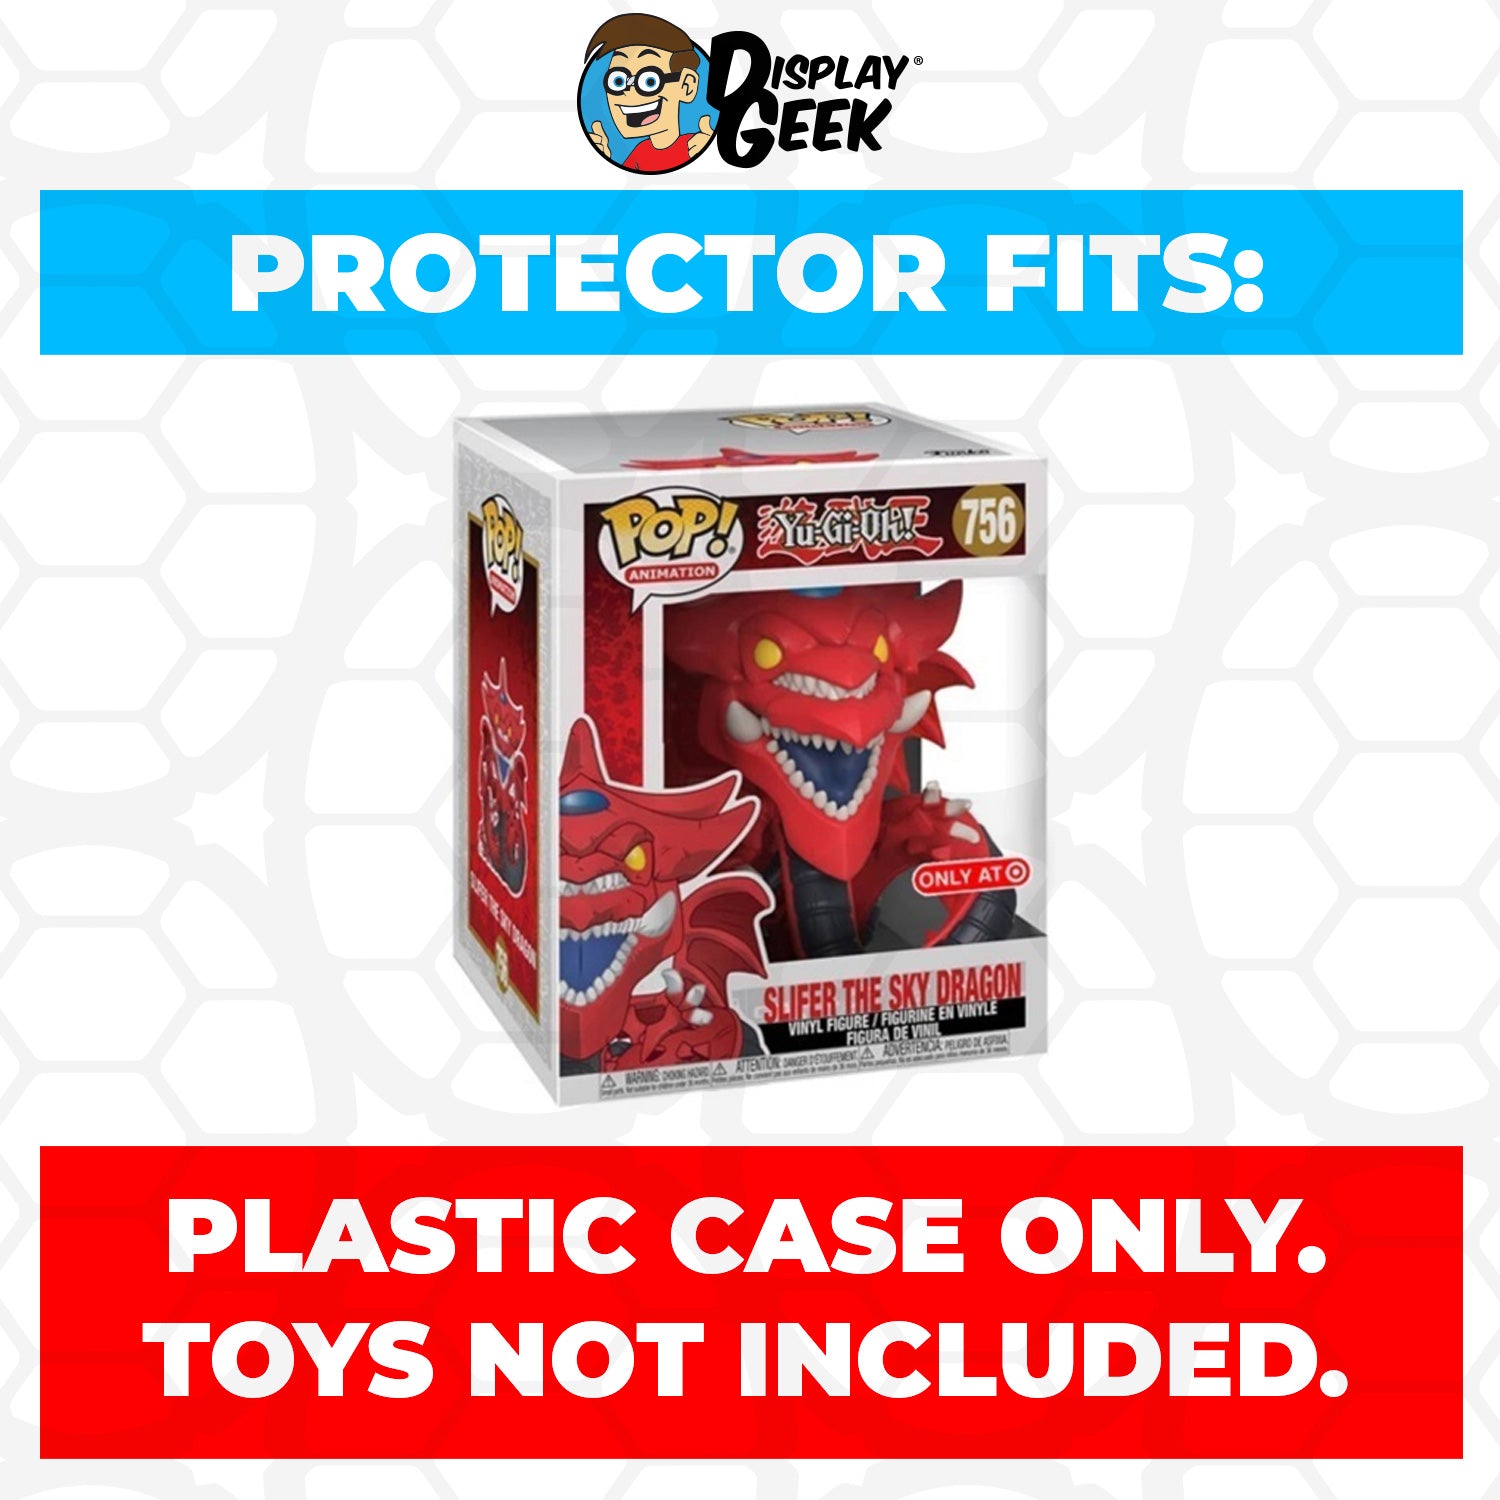 Pop Protector for 6 inch Slifer the Sky Dragon #756 Super Funko Pop - PPG Pop Protector Guide Search Created by Display Geek